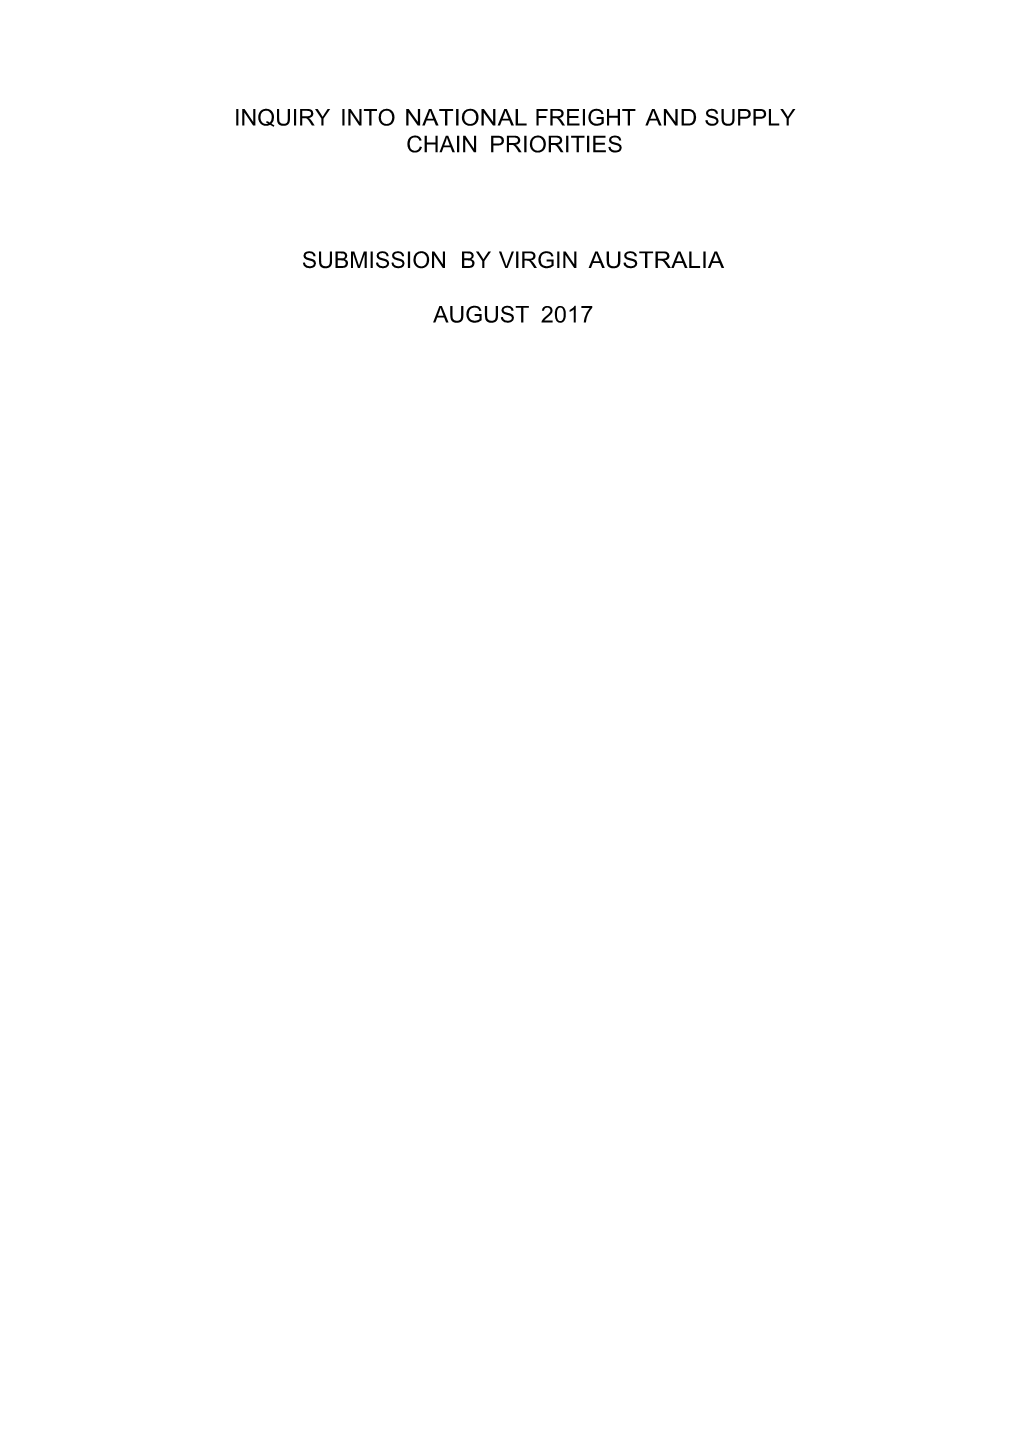 Virgin Australia - Submission to Inquiry Into National Freight and Supply Chain Priorities FINAL